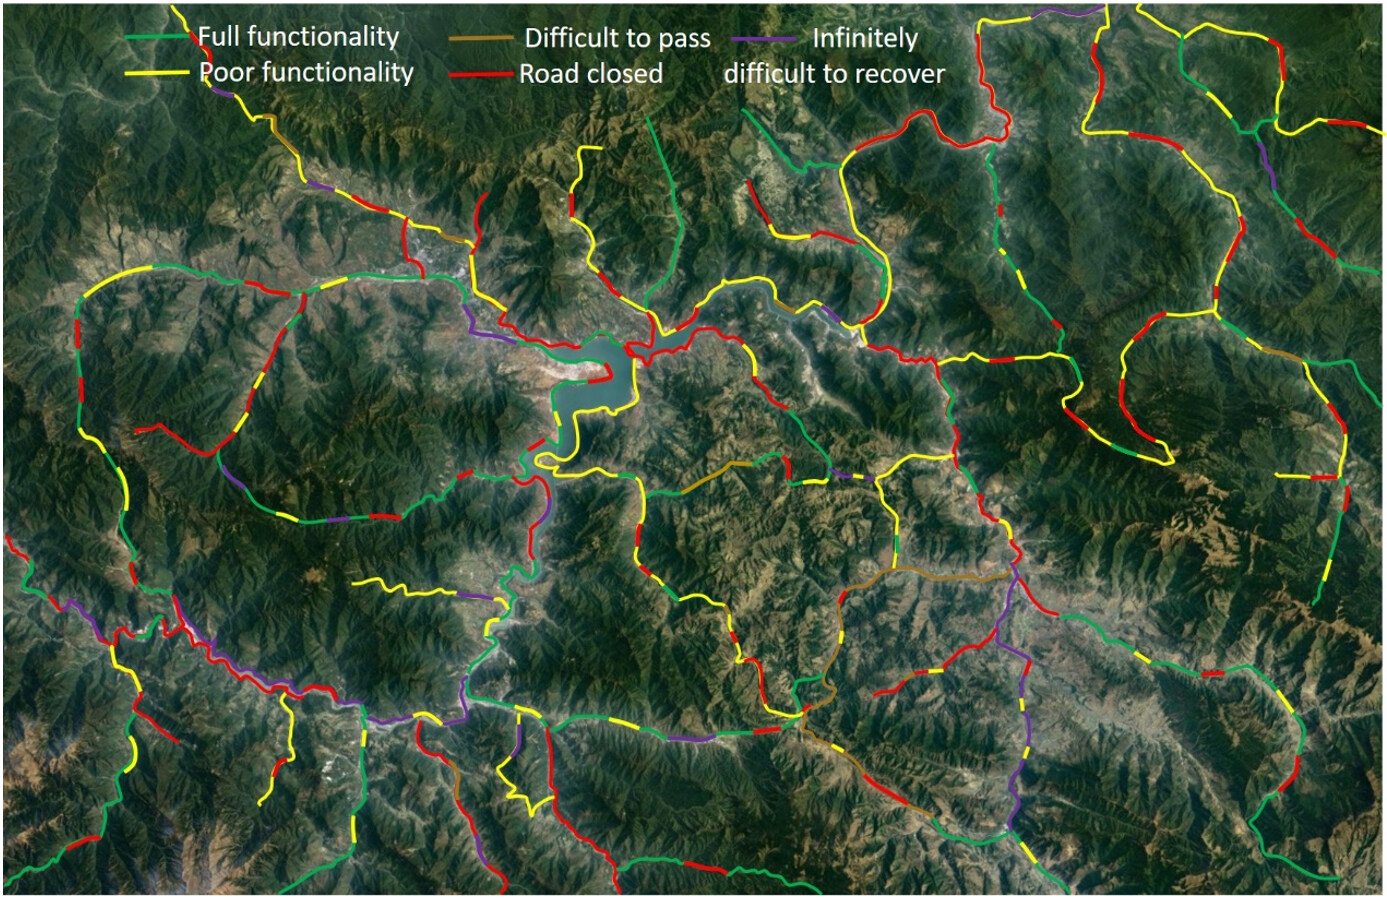 From slope seismic resilience to regional road network resilience: an integrated framework for evaluating the seismic resilience of mountainous road networks